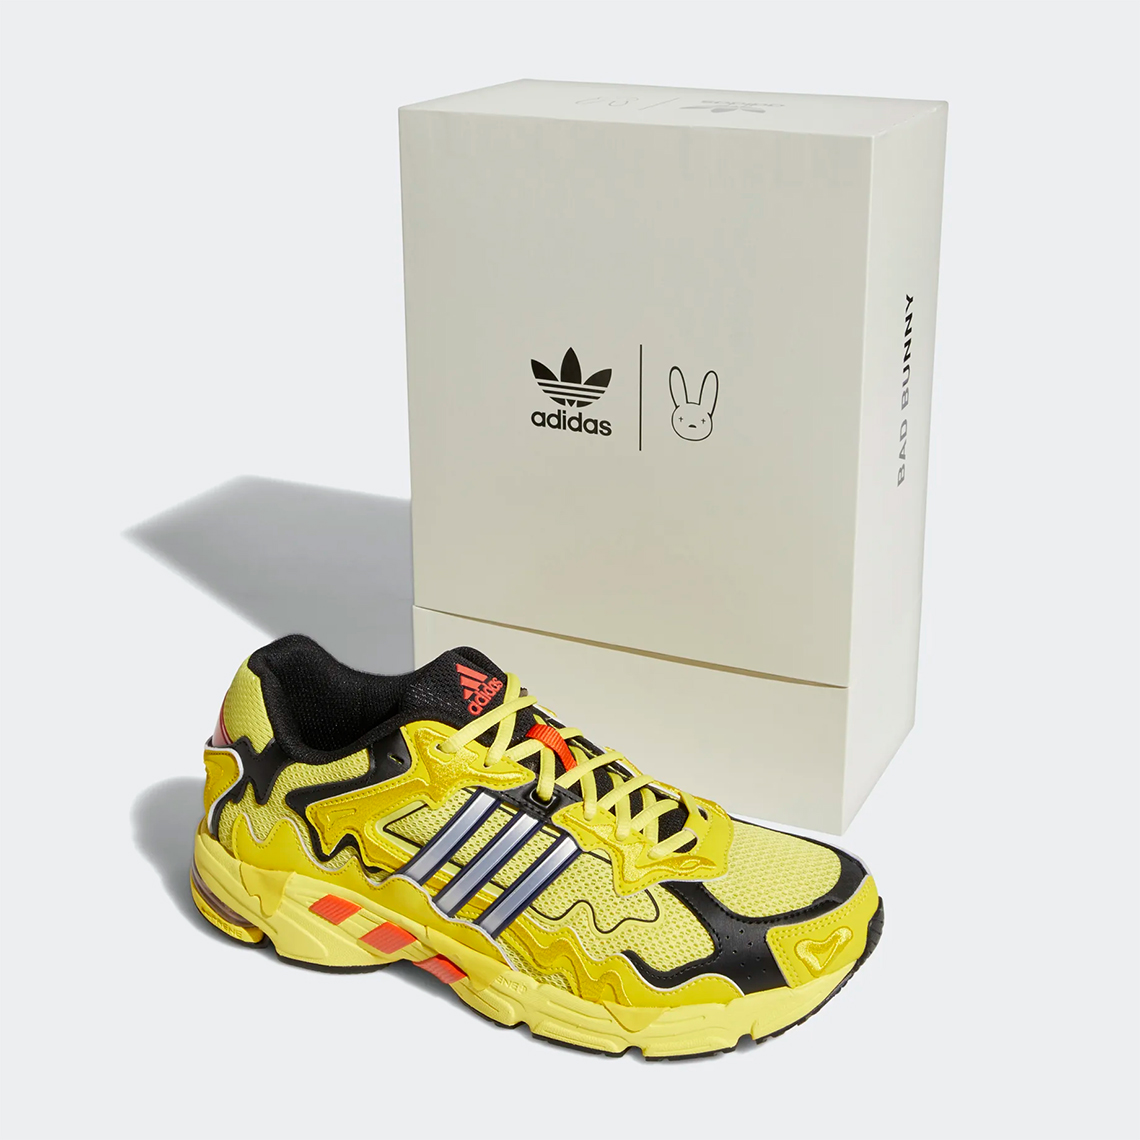 adidas response cl bad bunny yellow gy0101 release date 2